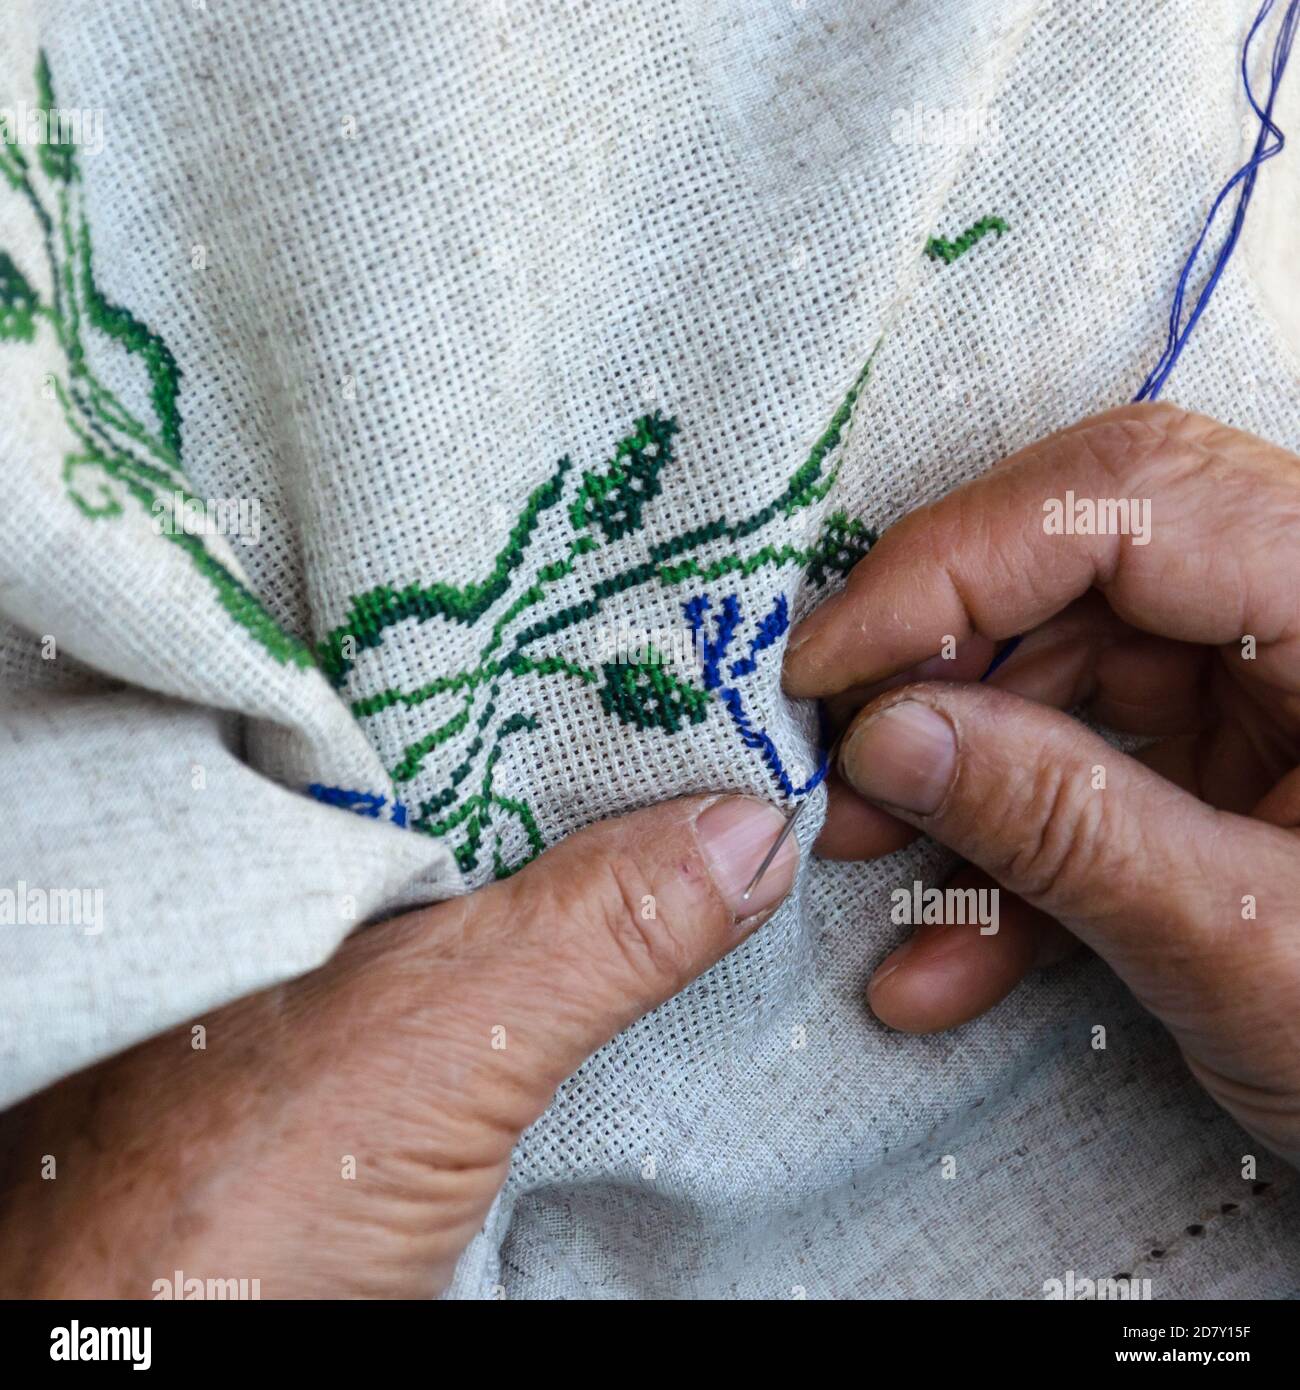 Hands of an elderly woman embroidering a cross-stitch floral pattern on linen fabric. Embroidery, handwork, needlecraft concept. Close-up Stock Photo